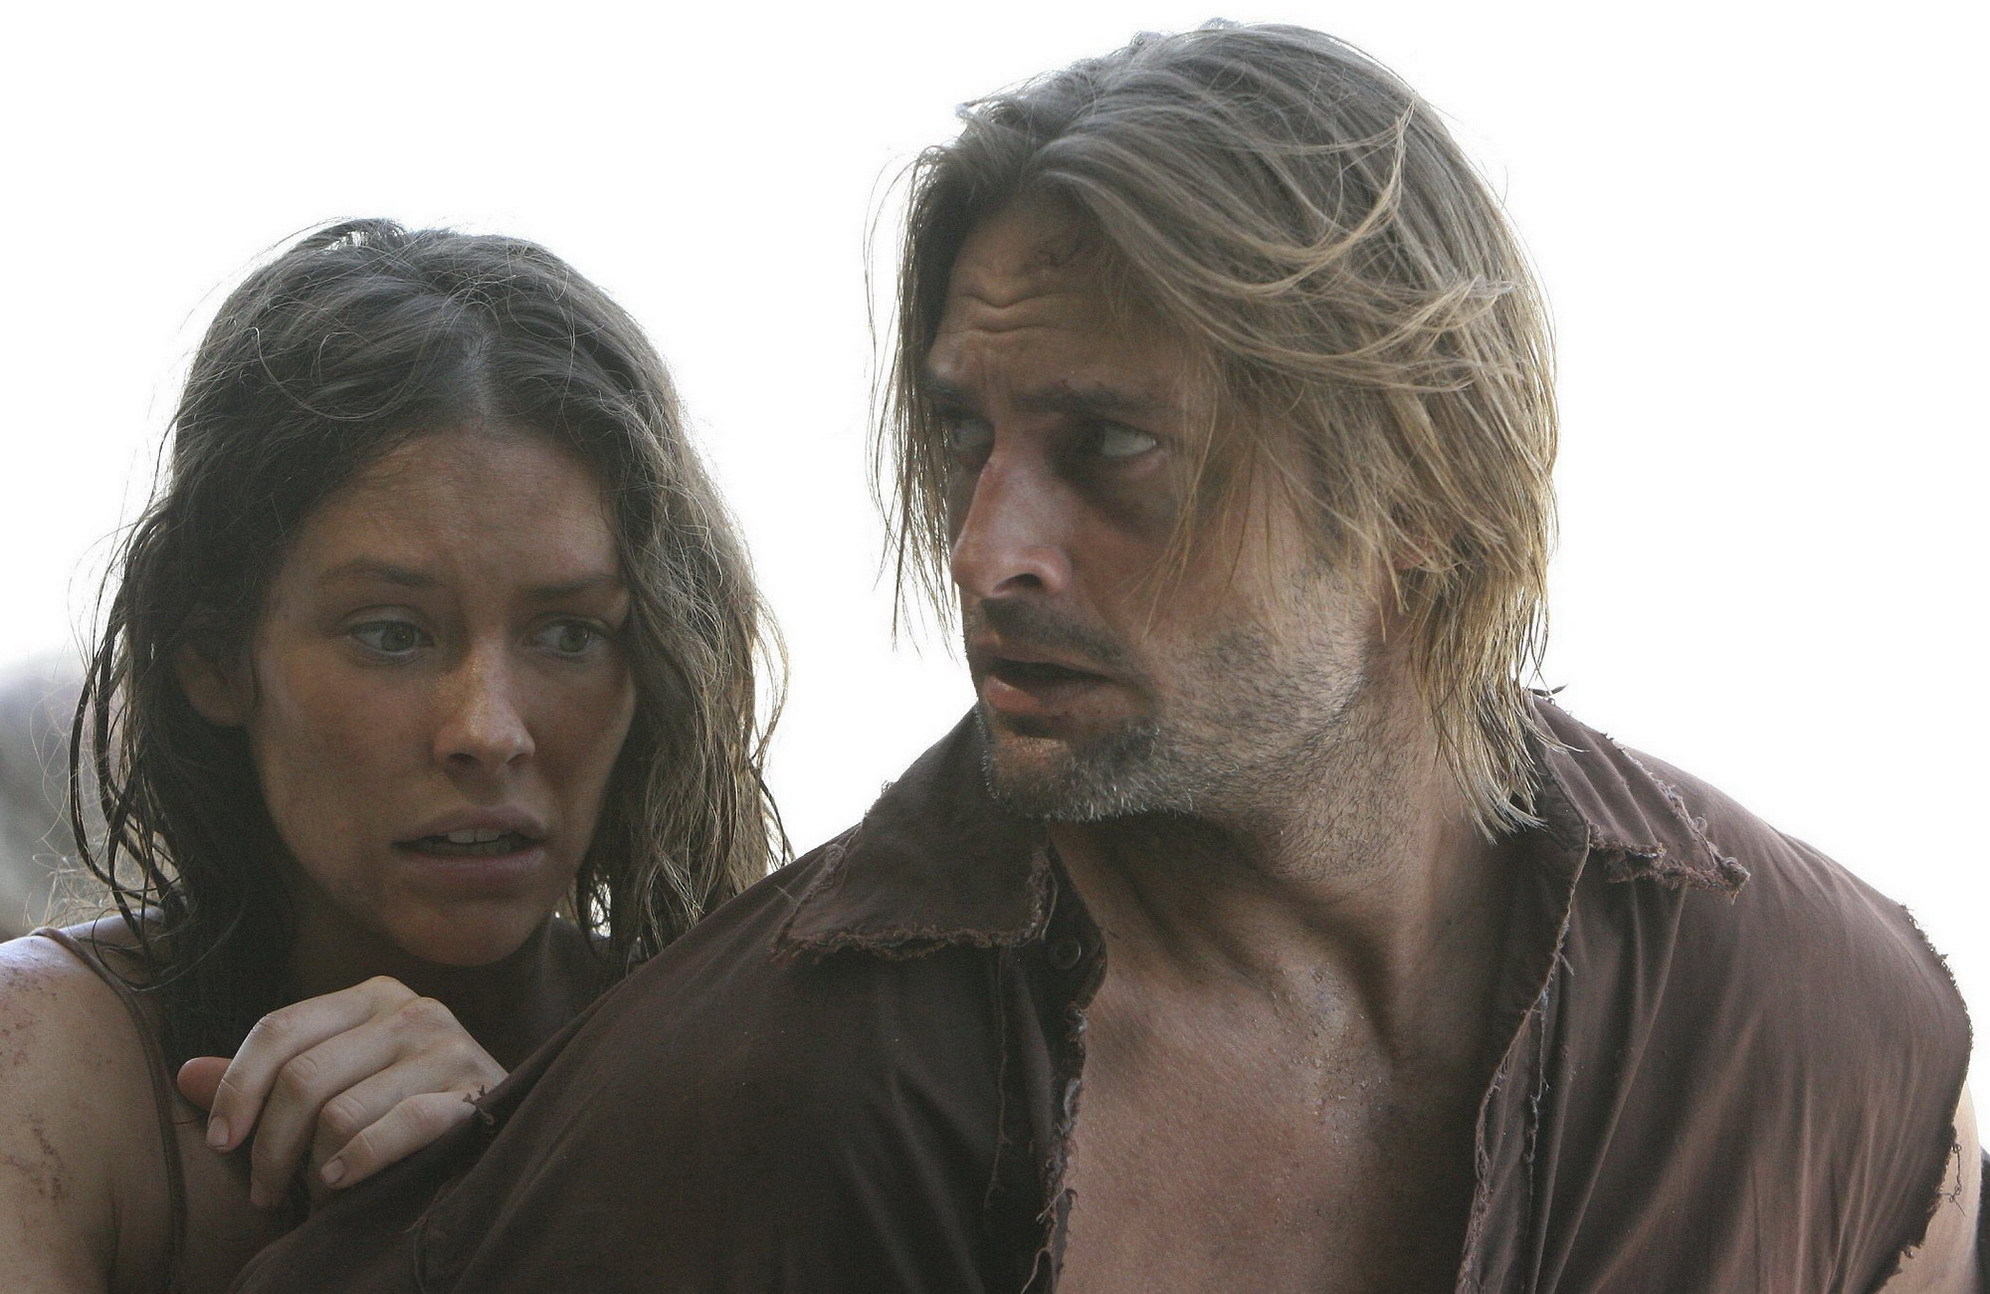 Kate and Sawyer Images on Fanpop.